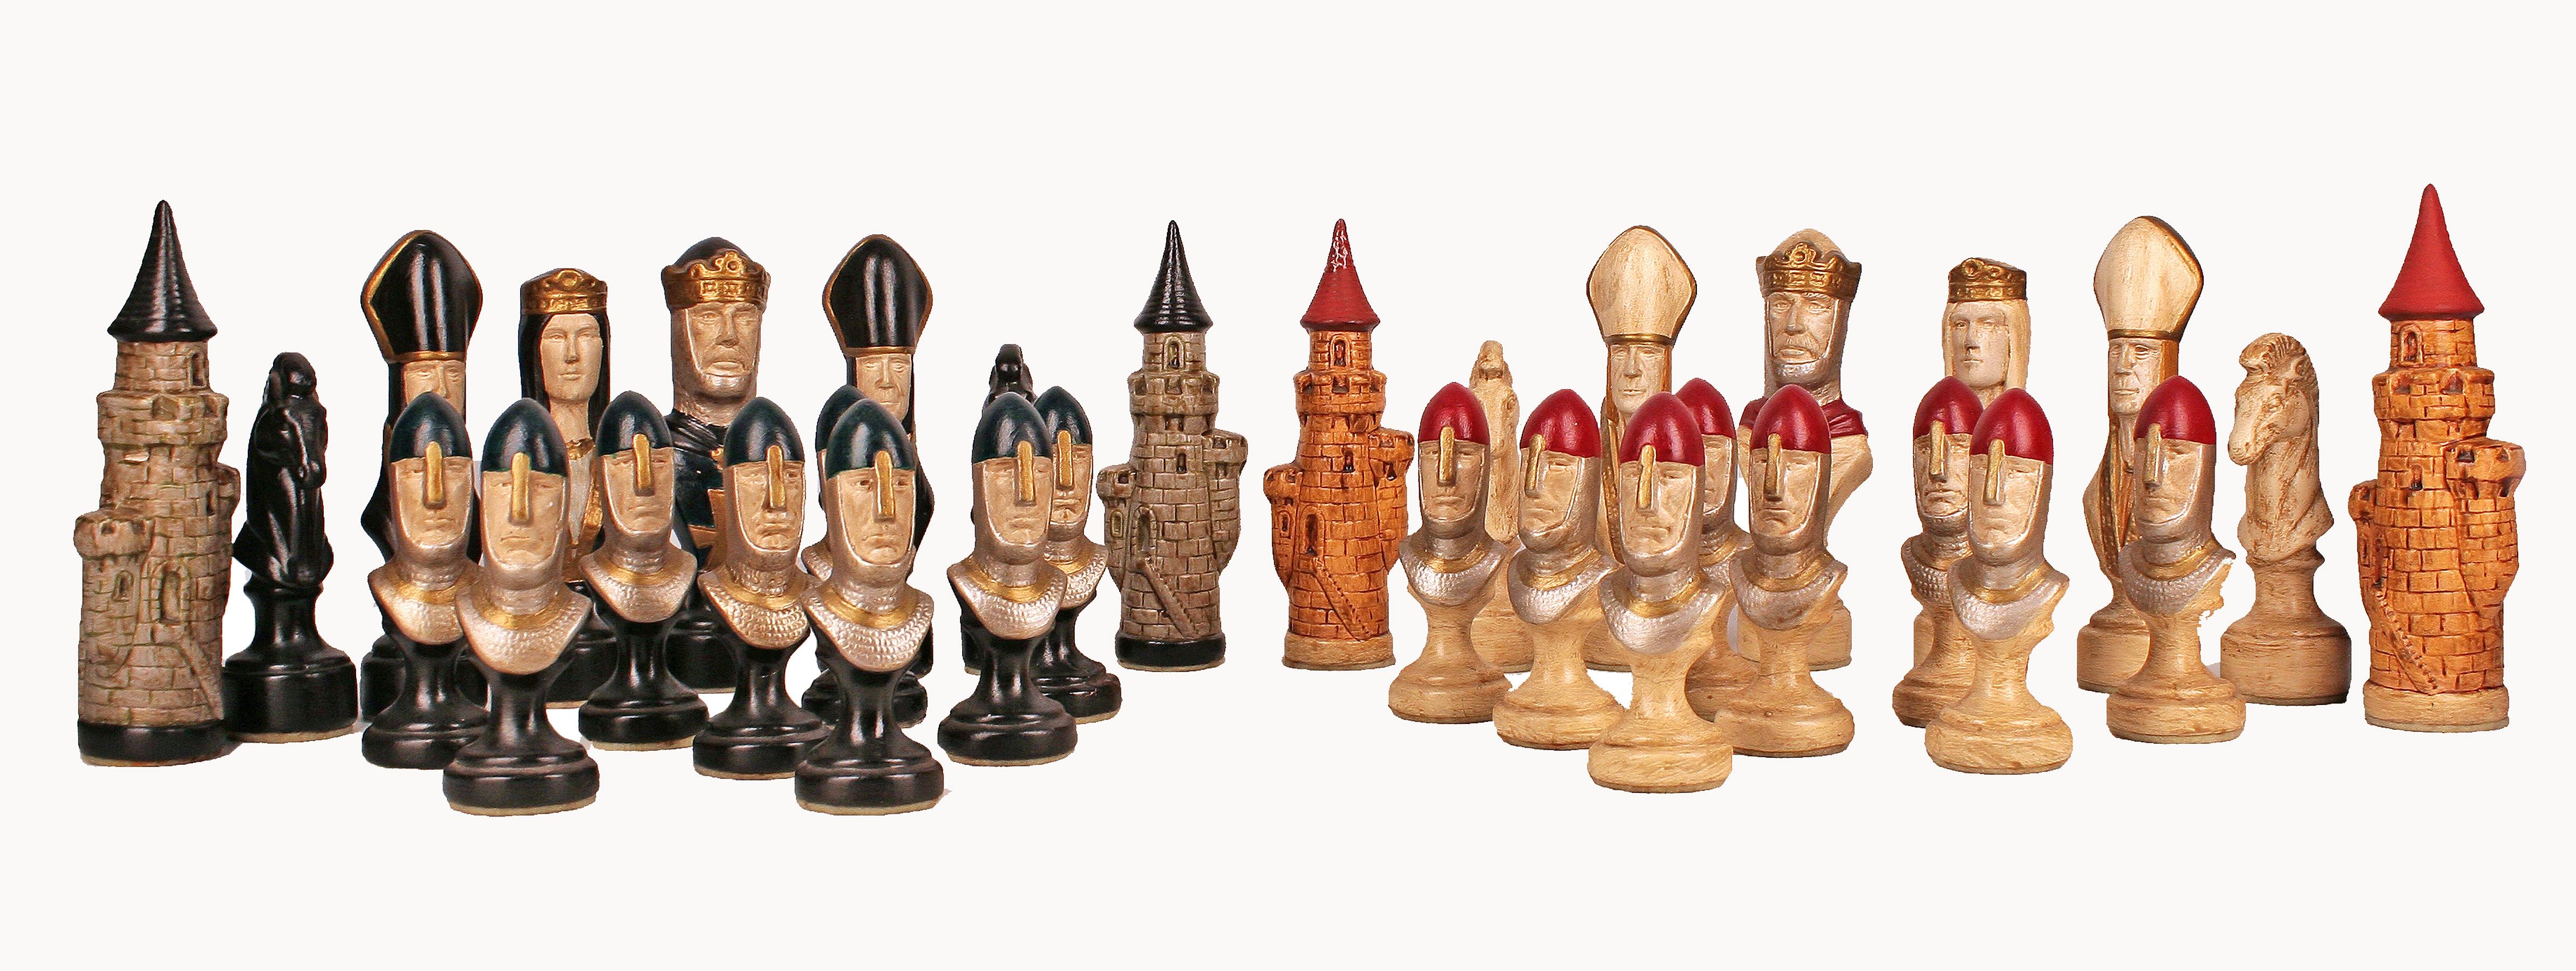 Mid-20th century english Camelot/King Arthur chess set made in hand-painted ceramic

By: unknown
Material: ceramic, enamel, paint, felt
Technique: molded, pressed, painted, hand-painted, hand-crafted, enameled, carved, hand-carved
Dimensions: 2 in x